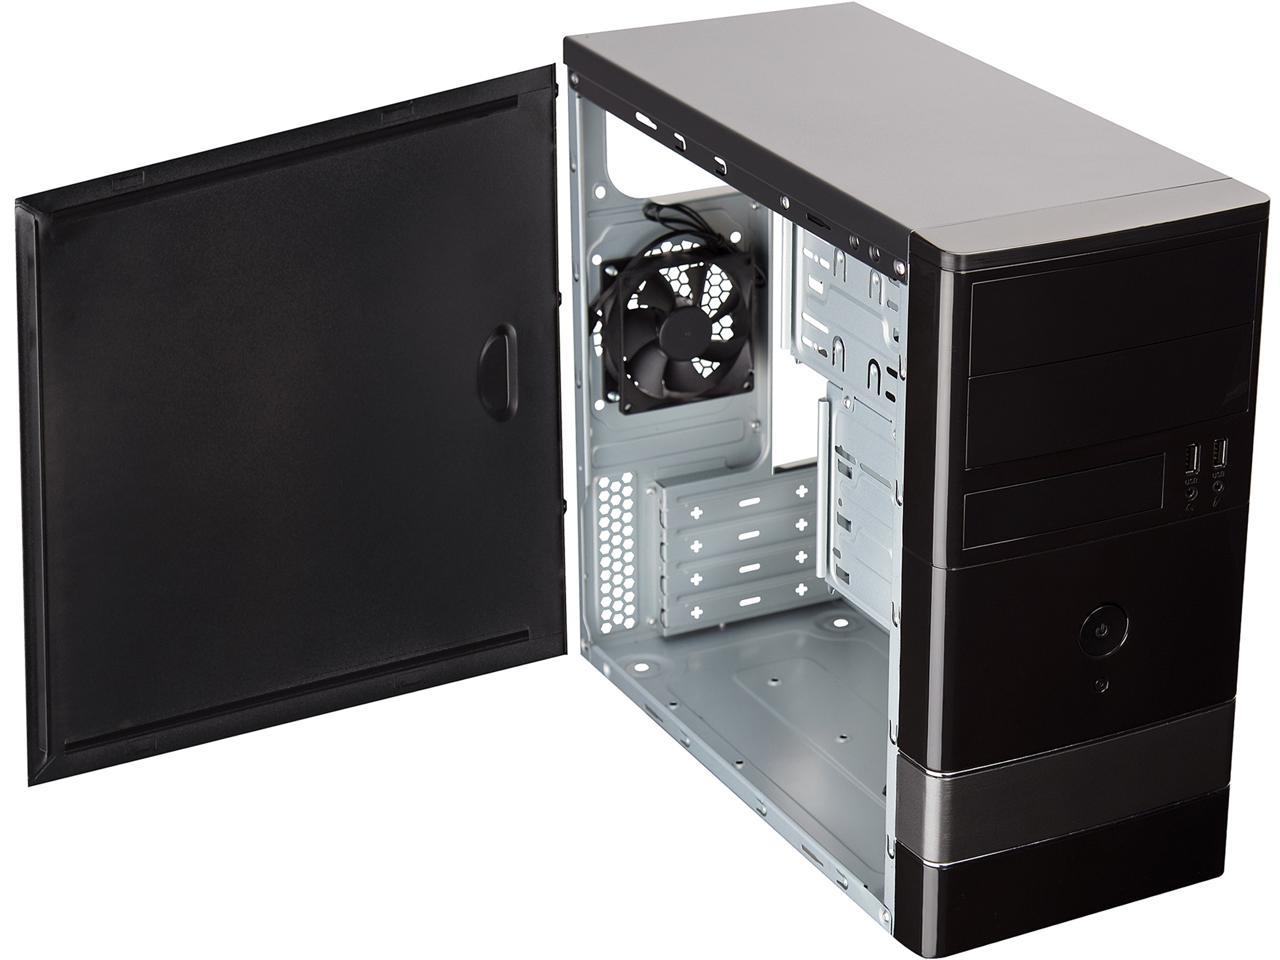 Rosewill Micro ATX Mini Tower Computer Case with Dual Fans - FBM-01 | eBay